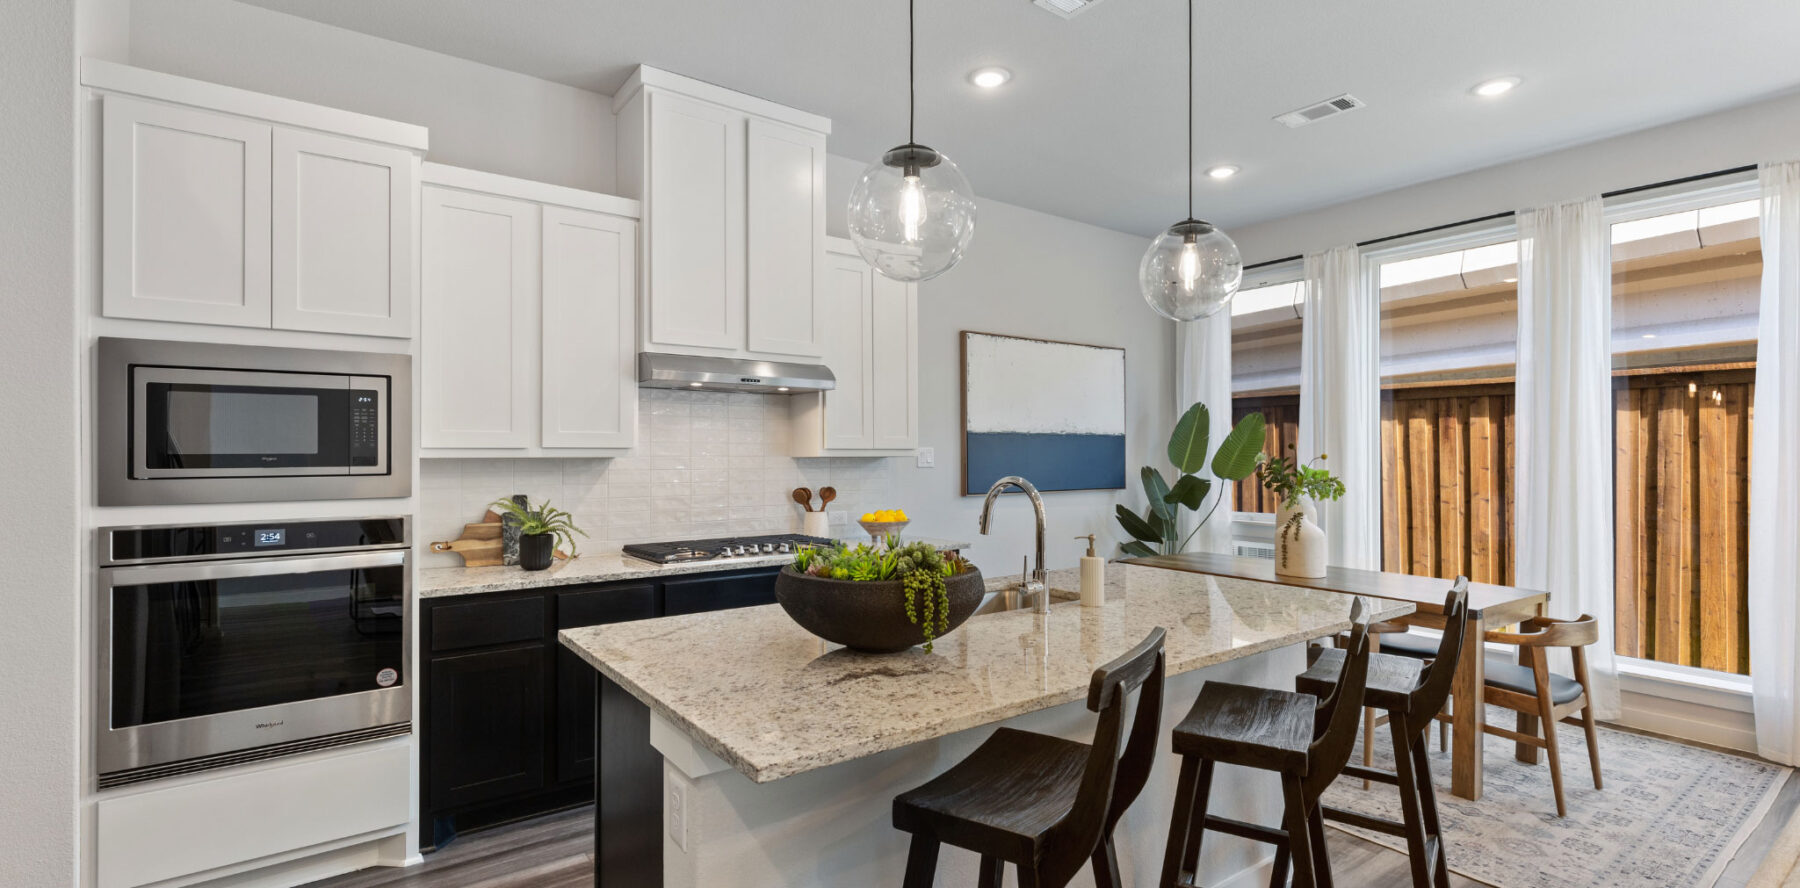 A kitchen in a new home with white cabinets and stainless steel appliances.